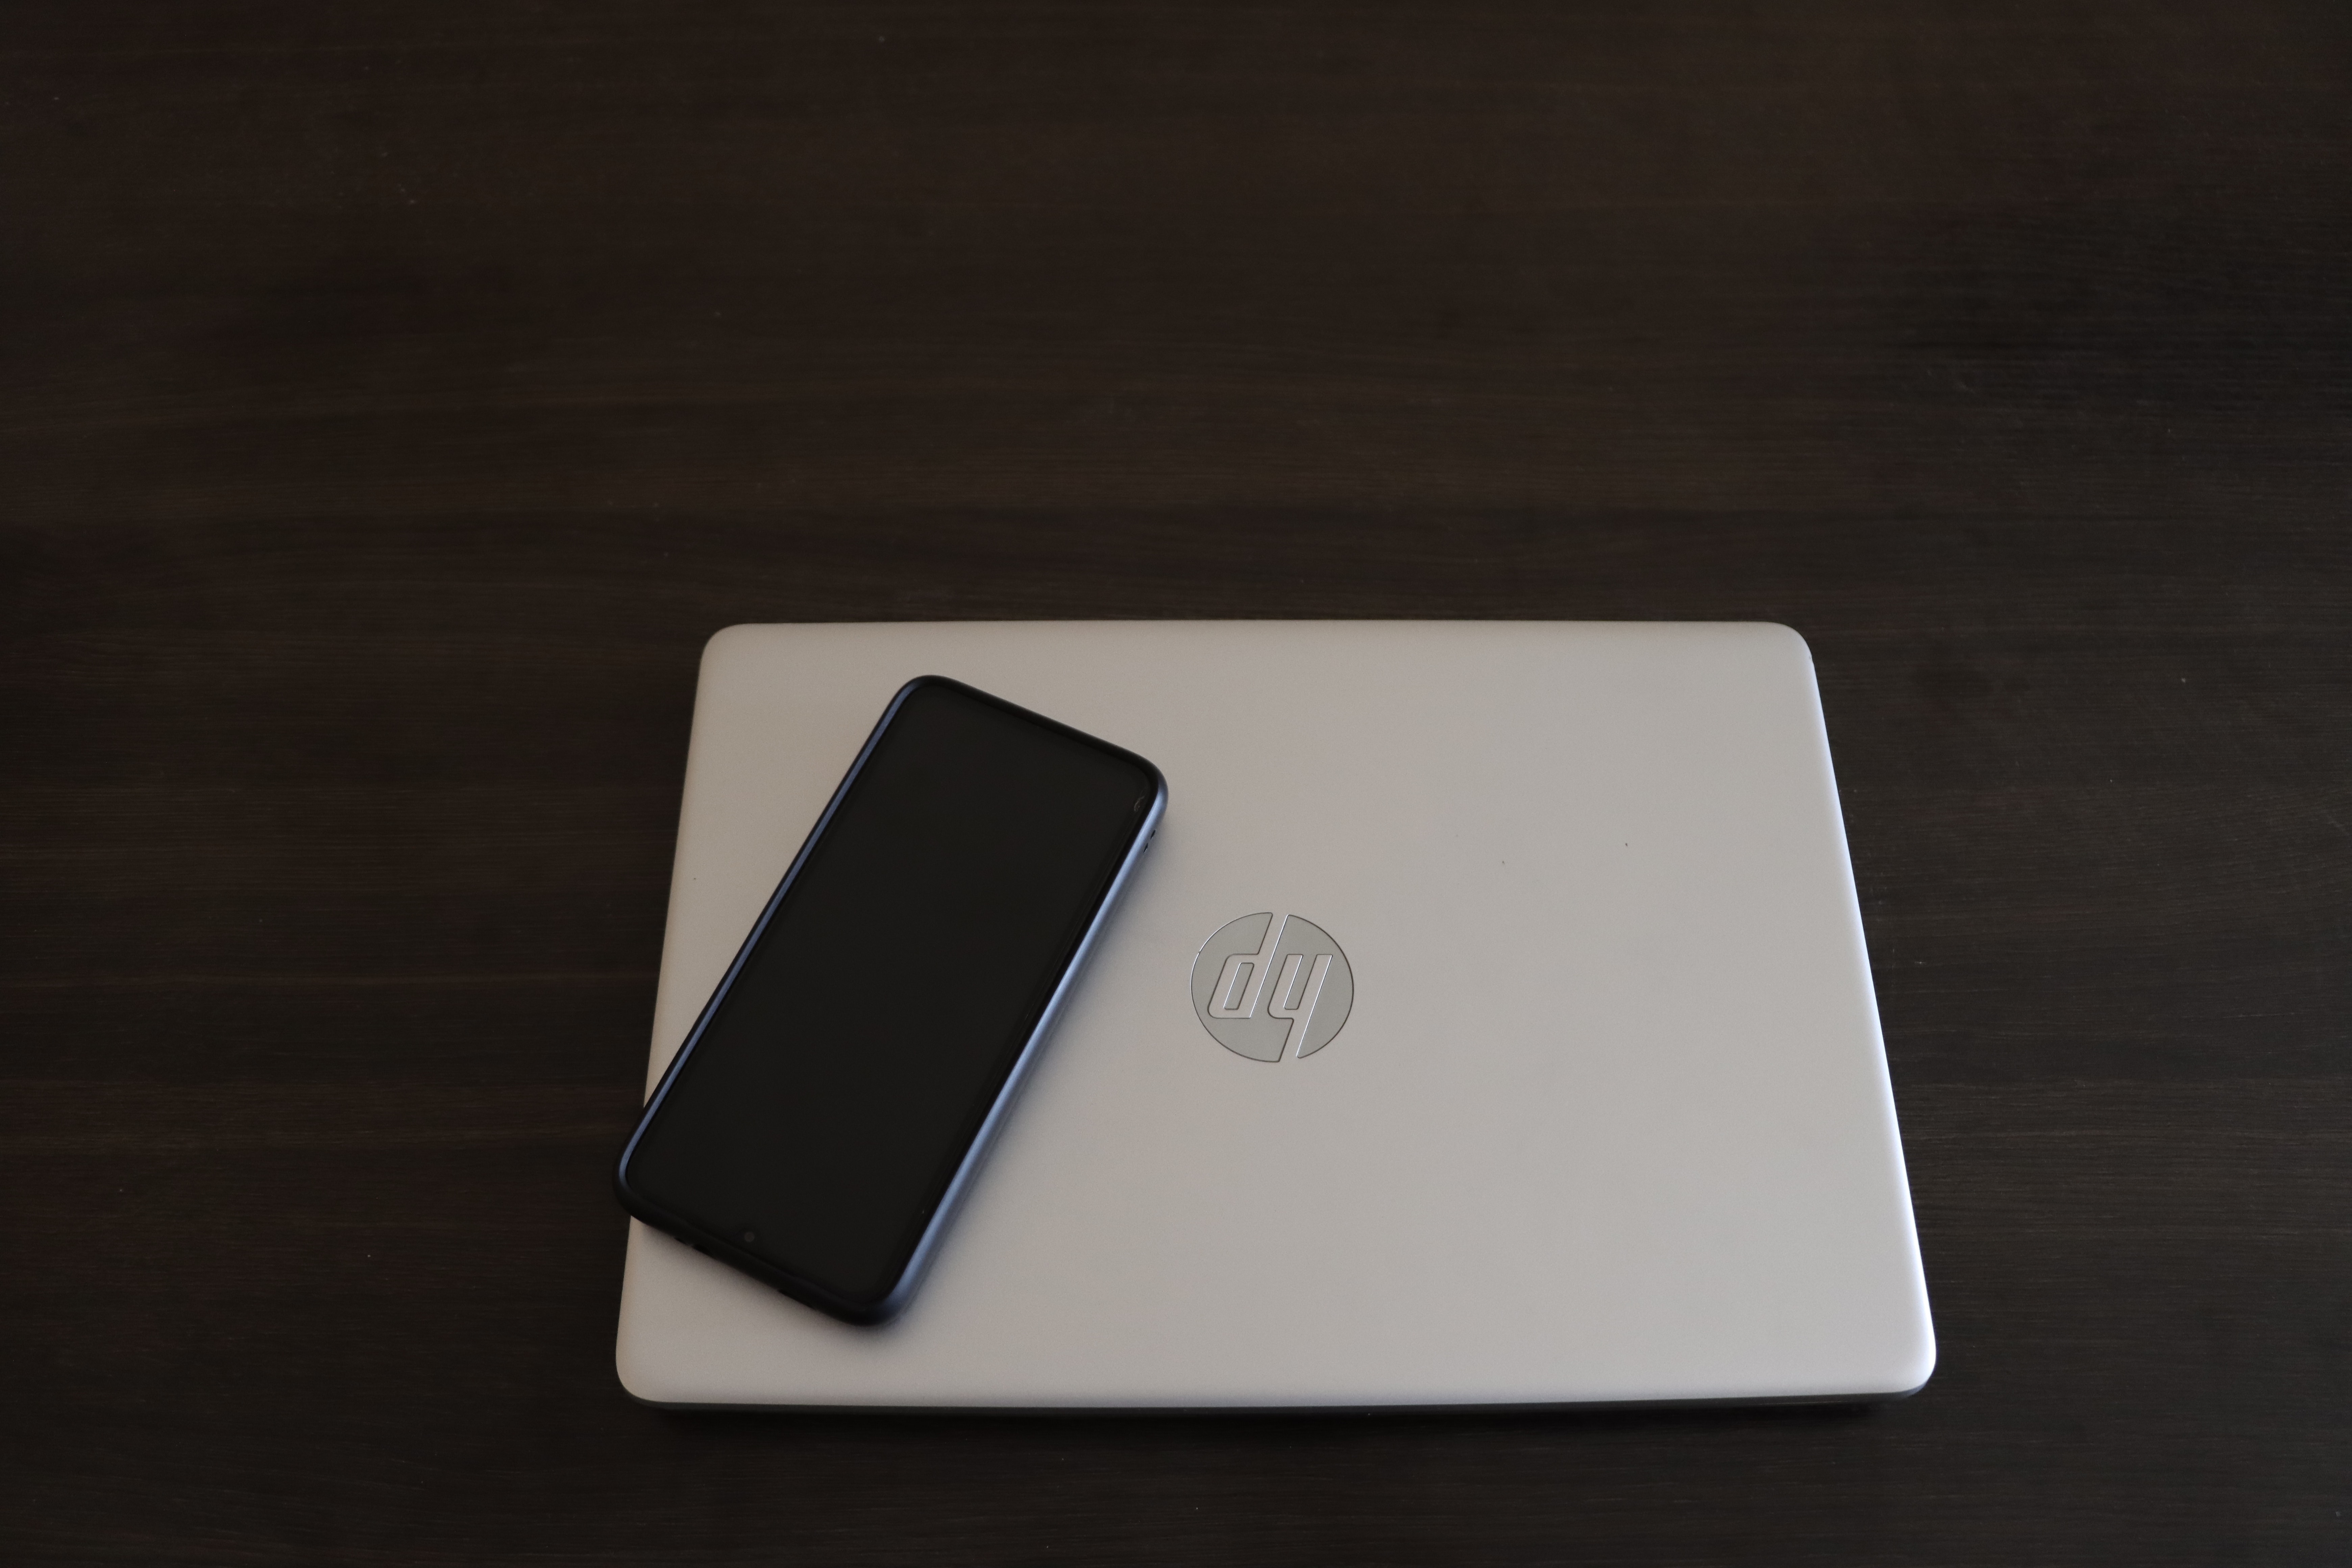 Hp envy x360 silver laptop with a smartphone on top of it